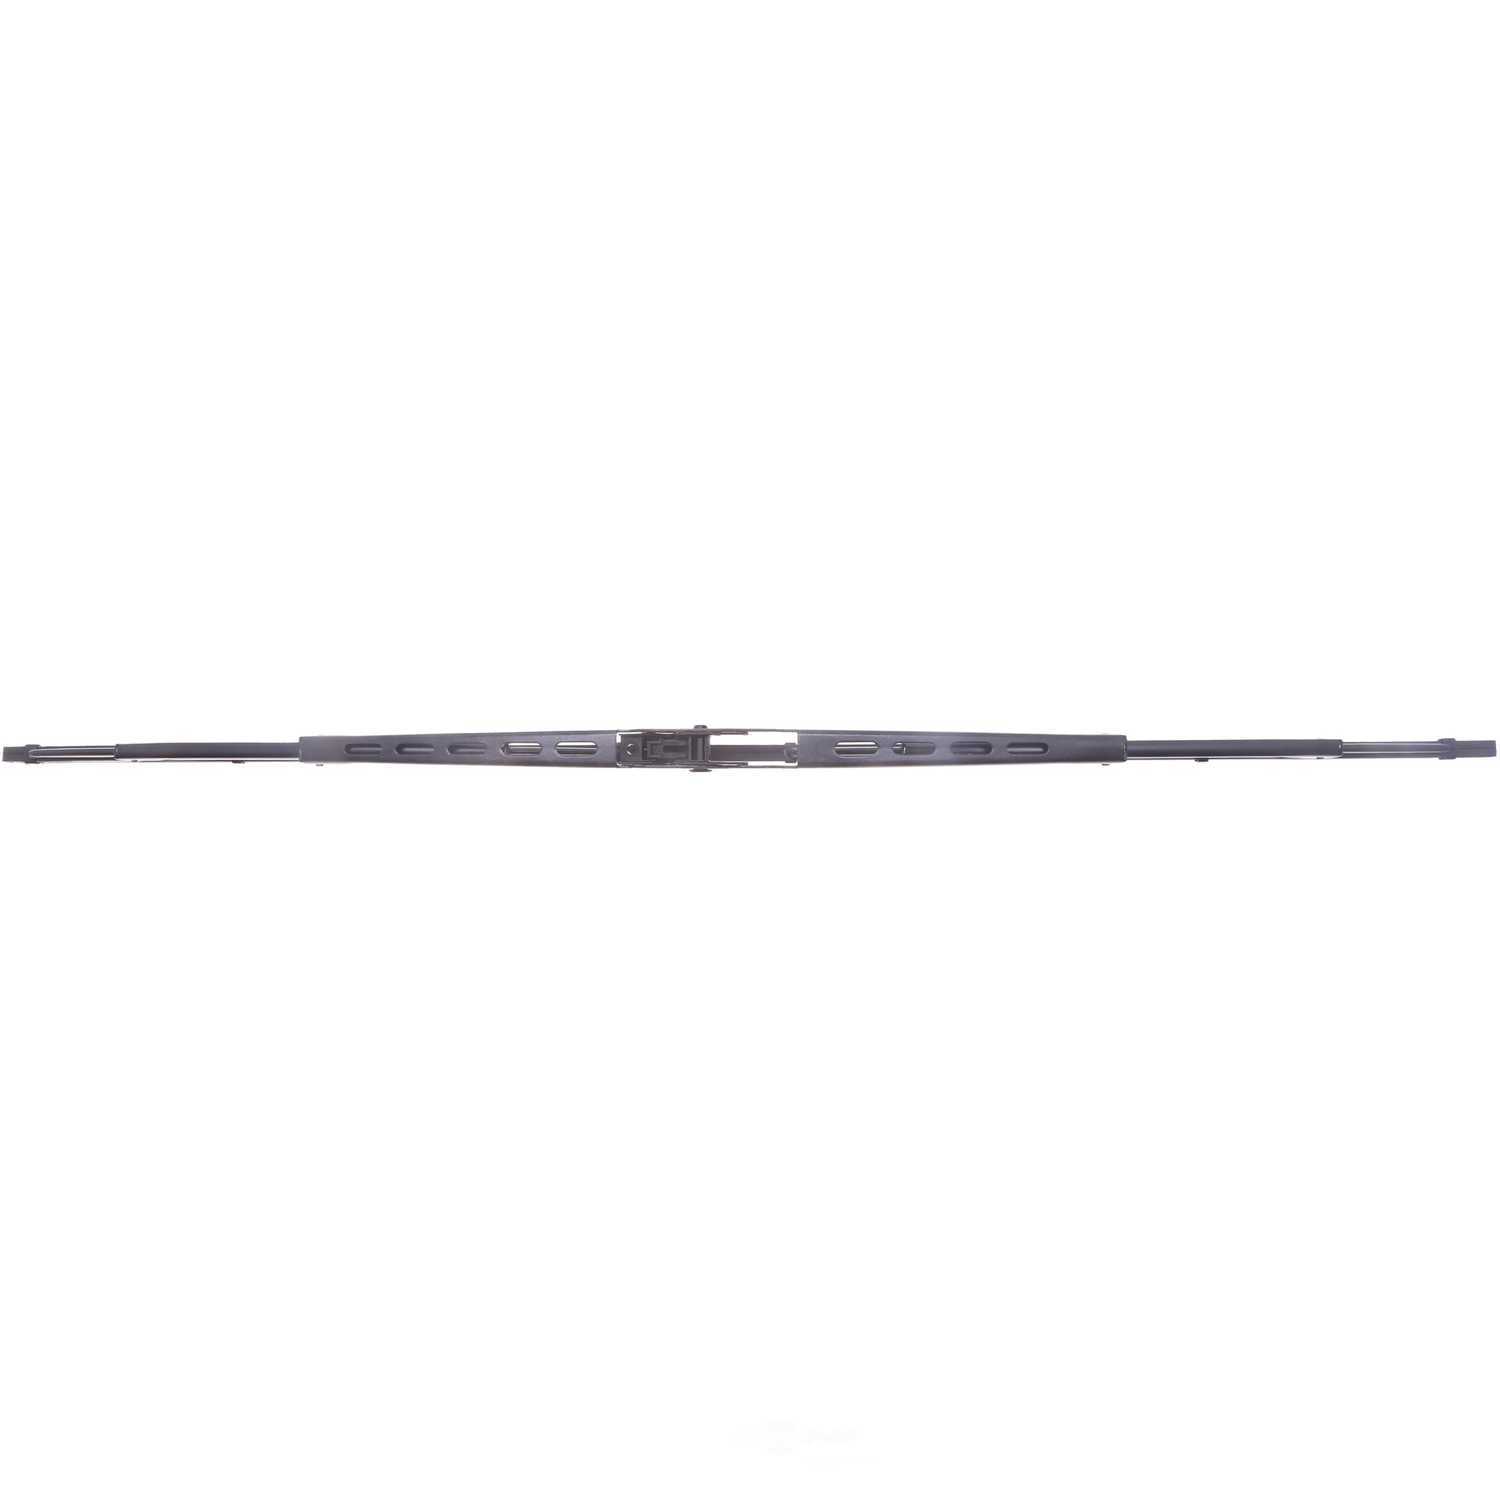 ACDELCO GOLD/PROFESSIONAL - Performance Windshield Wiper Blade (Rear) - DCC 8-2224